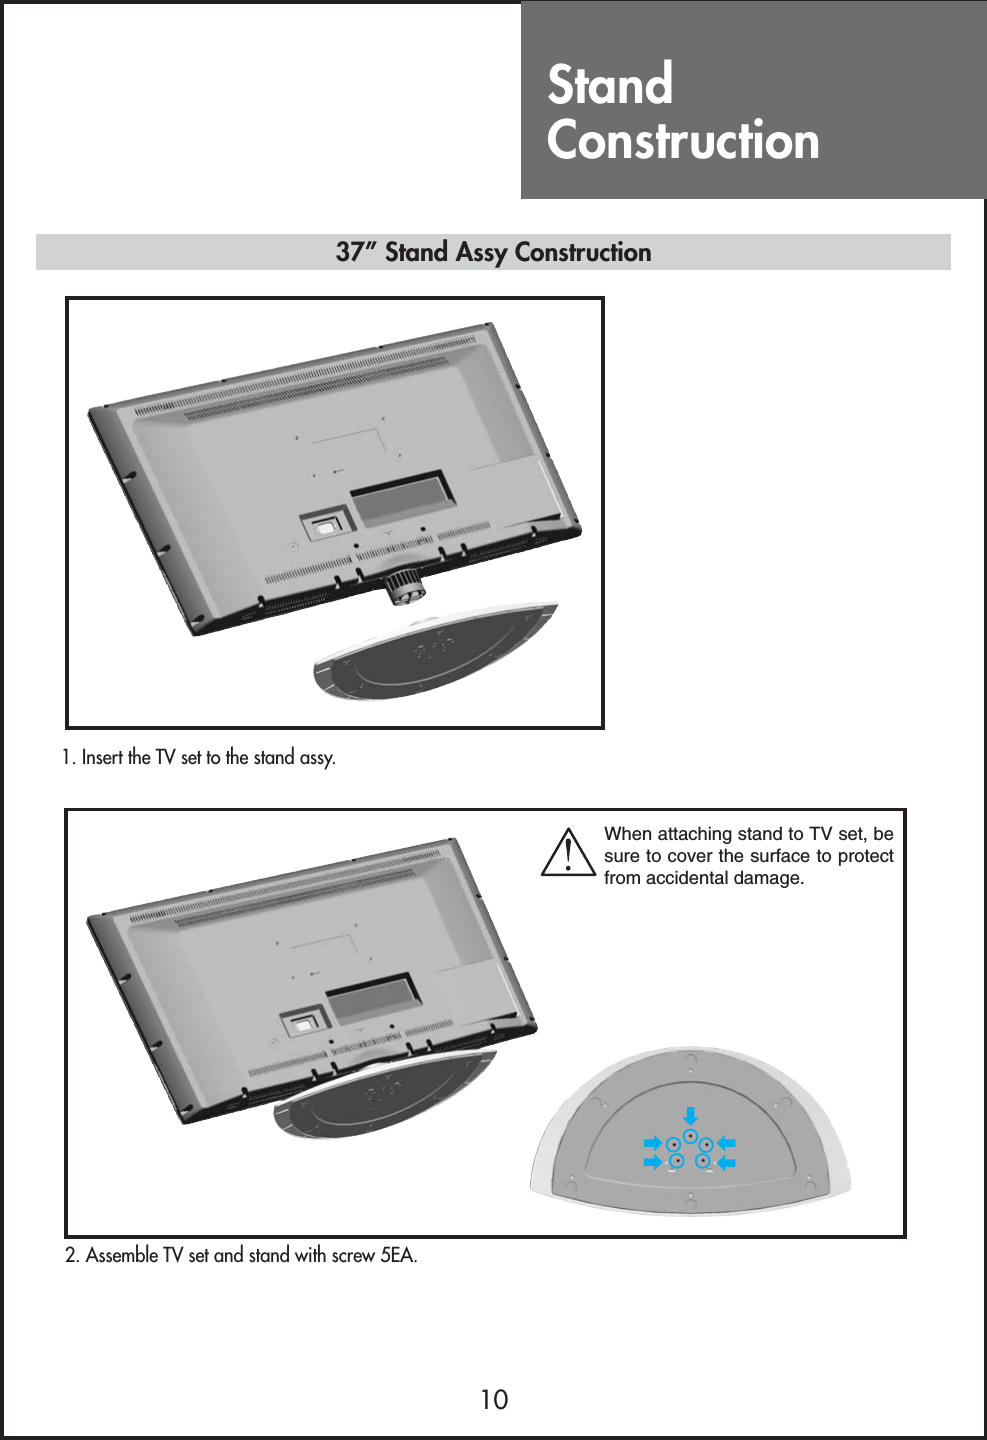 StandConstruction1037” Stand Assy Construction1. Insert the TV set to the stand assy.2. Assemble TV set and stand with screw 5EA.زززززWhen attaching stand to TV set, besure to cover the surface to protectfrom accidental damage.